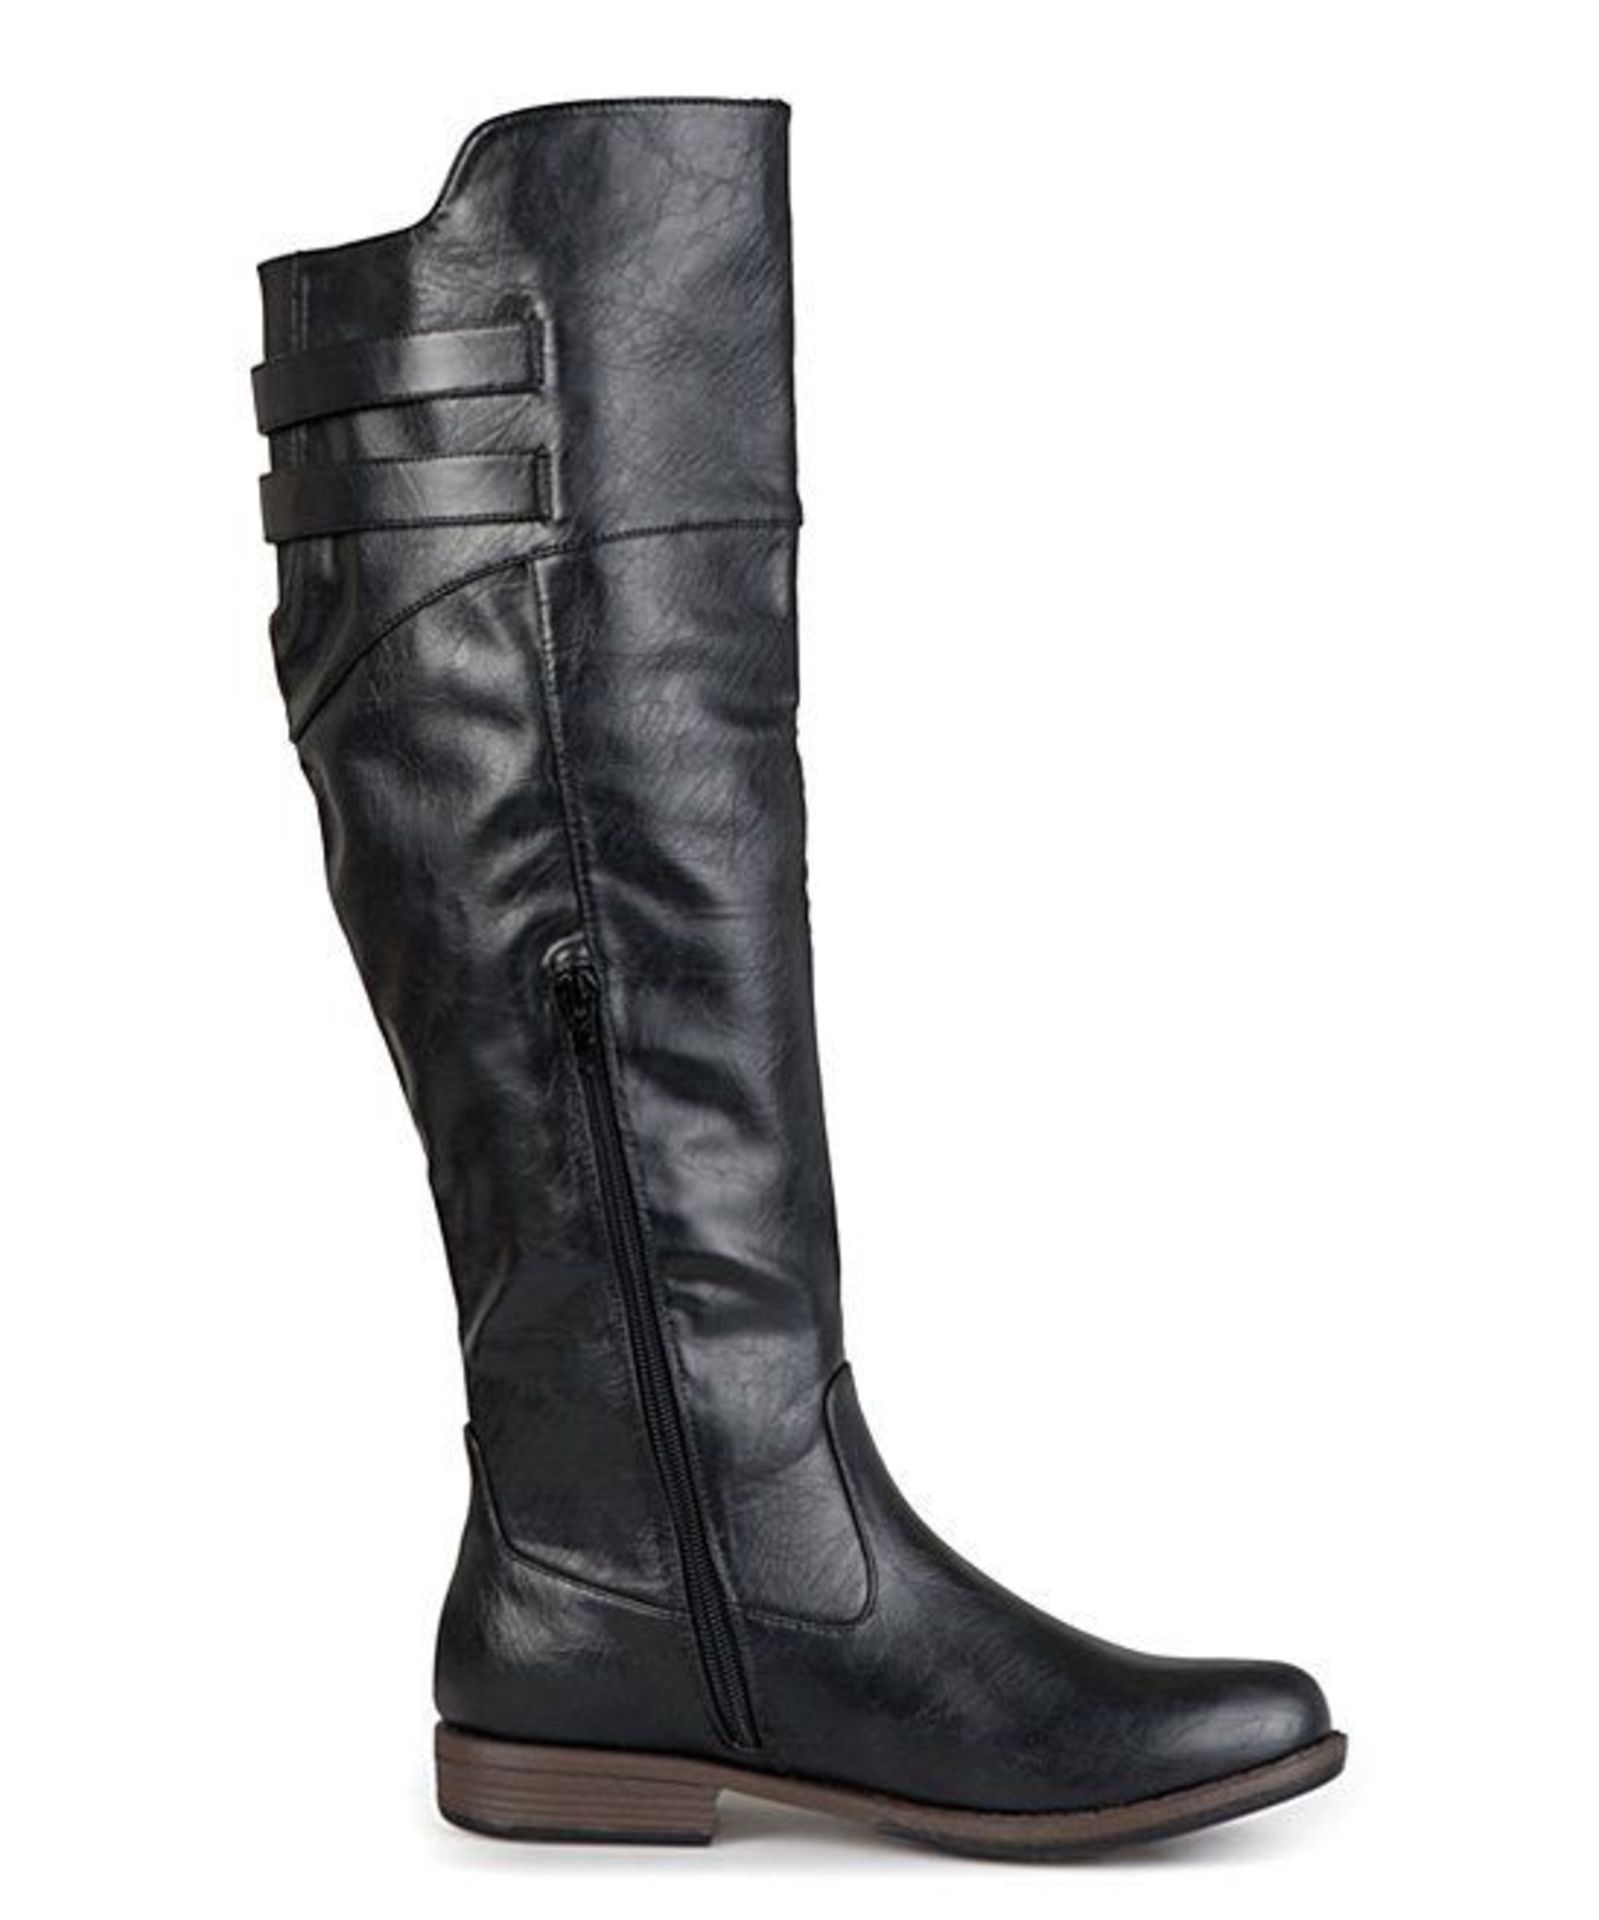 Journee Collection Black Tori Riding Boot (Uk Size 7:Us Size 9) (New with box) [Ref: 14251407-I- - Image 2 of 4